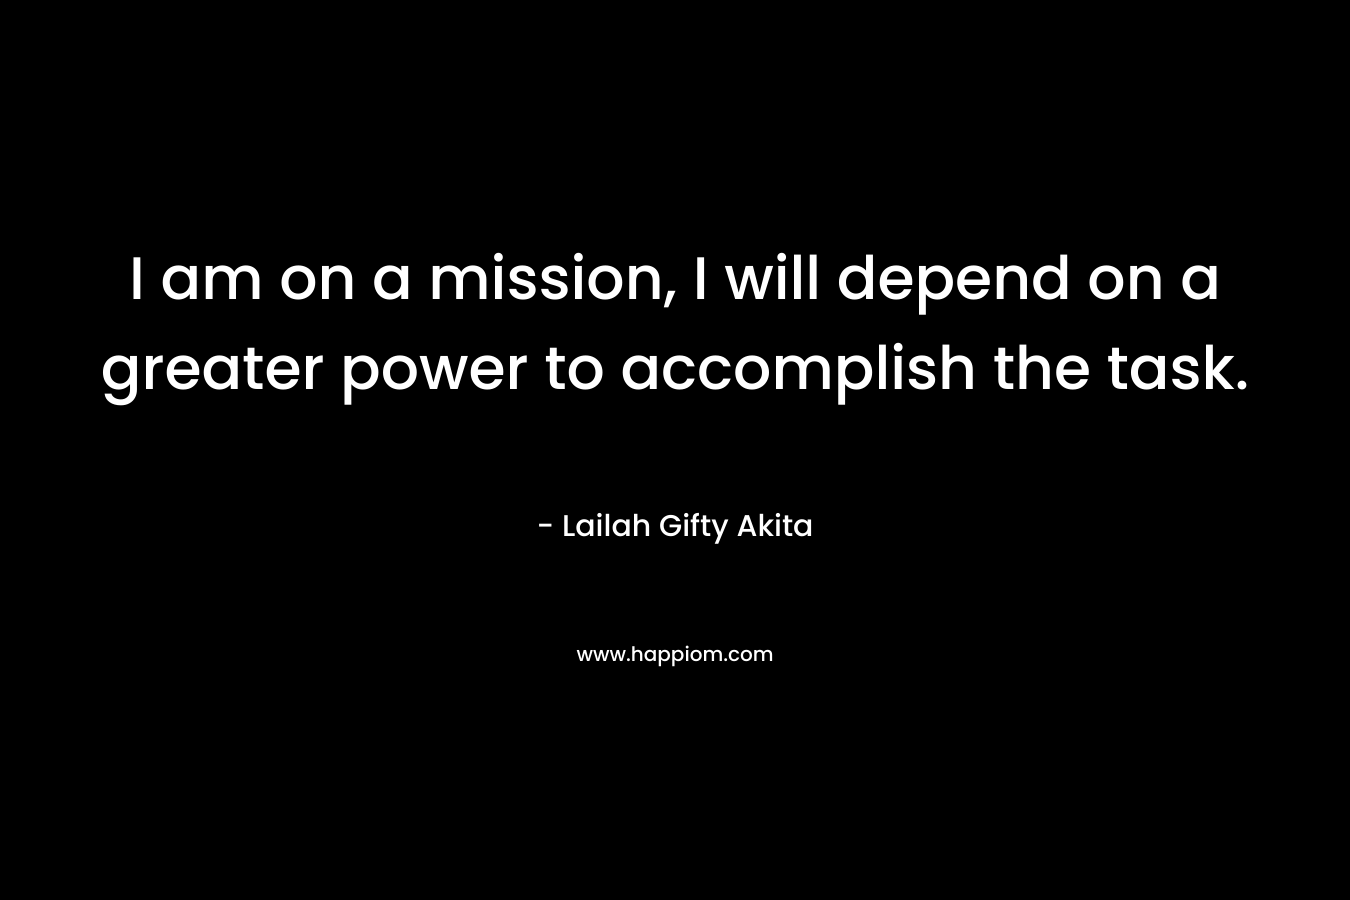 I am on a mission, I will depend on a greater power to accomplish the task.